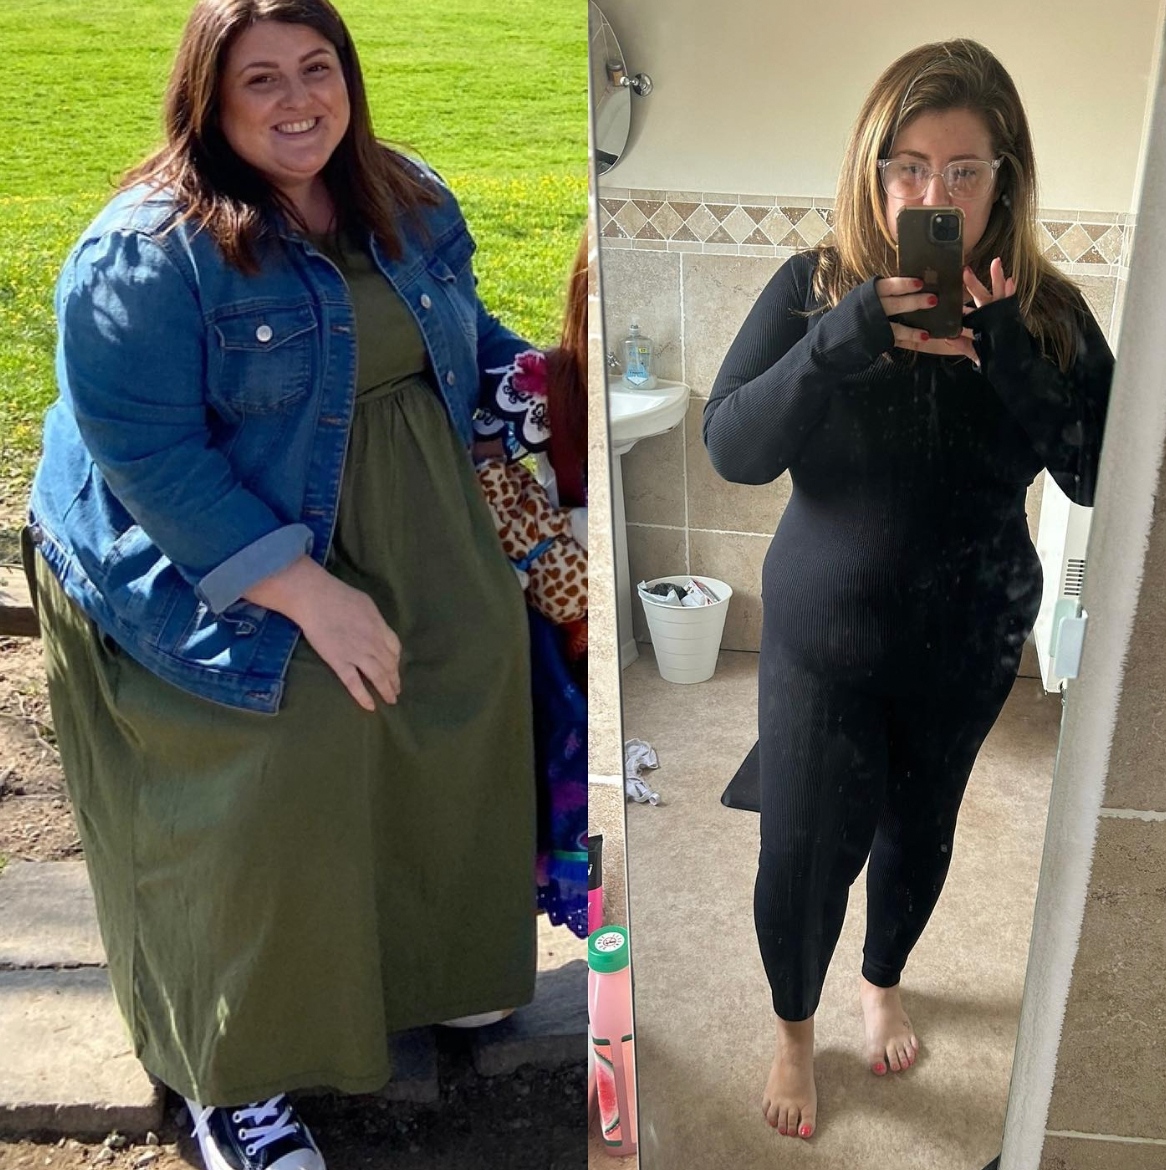 REPOST @sleevinglau 'August VS October...Still a long way to go, but the progress makes me so happy!' Well done Laura, keep going 💪 you've got this 🎉 #GivingBackLives⁠ ⁠ Get in touch to start your weight loss journey with Tonic today, Our friendly team are here for you 🤗